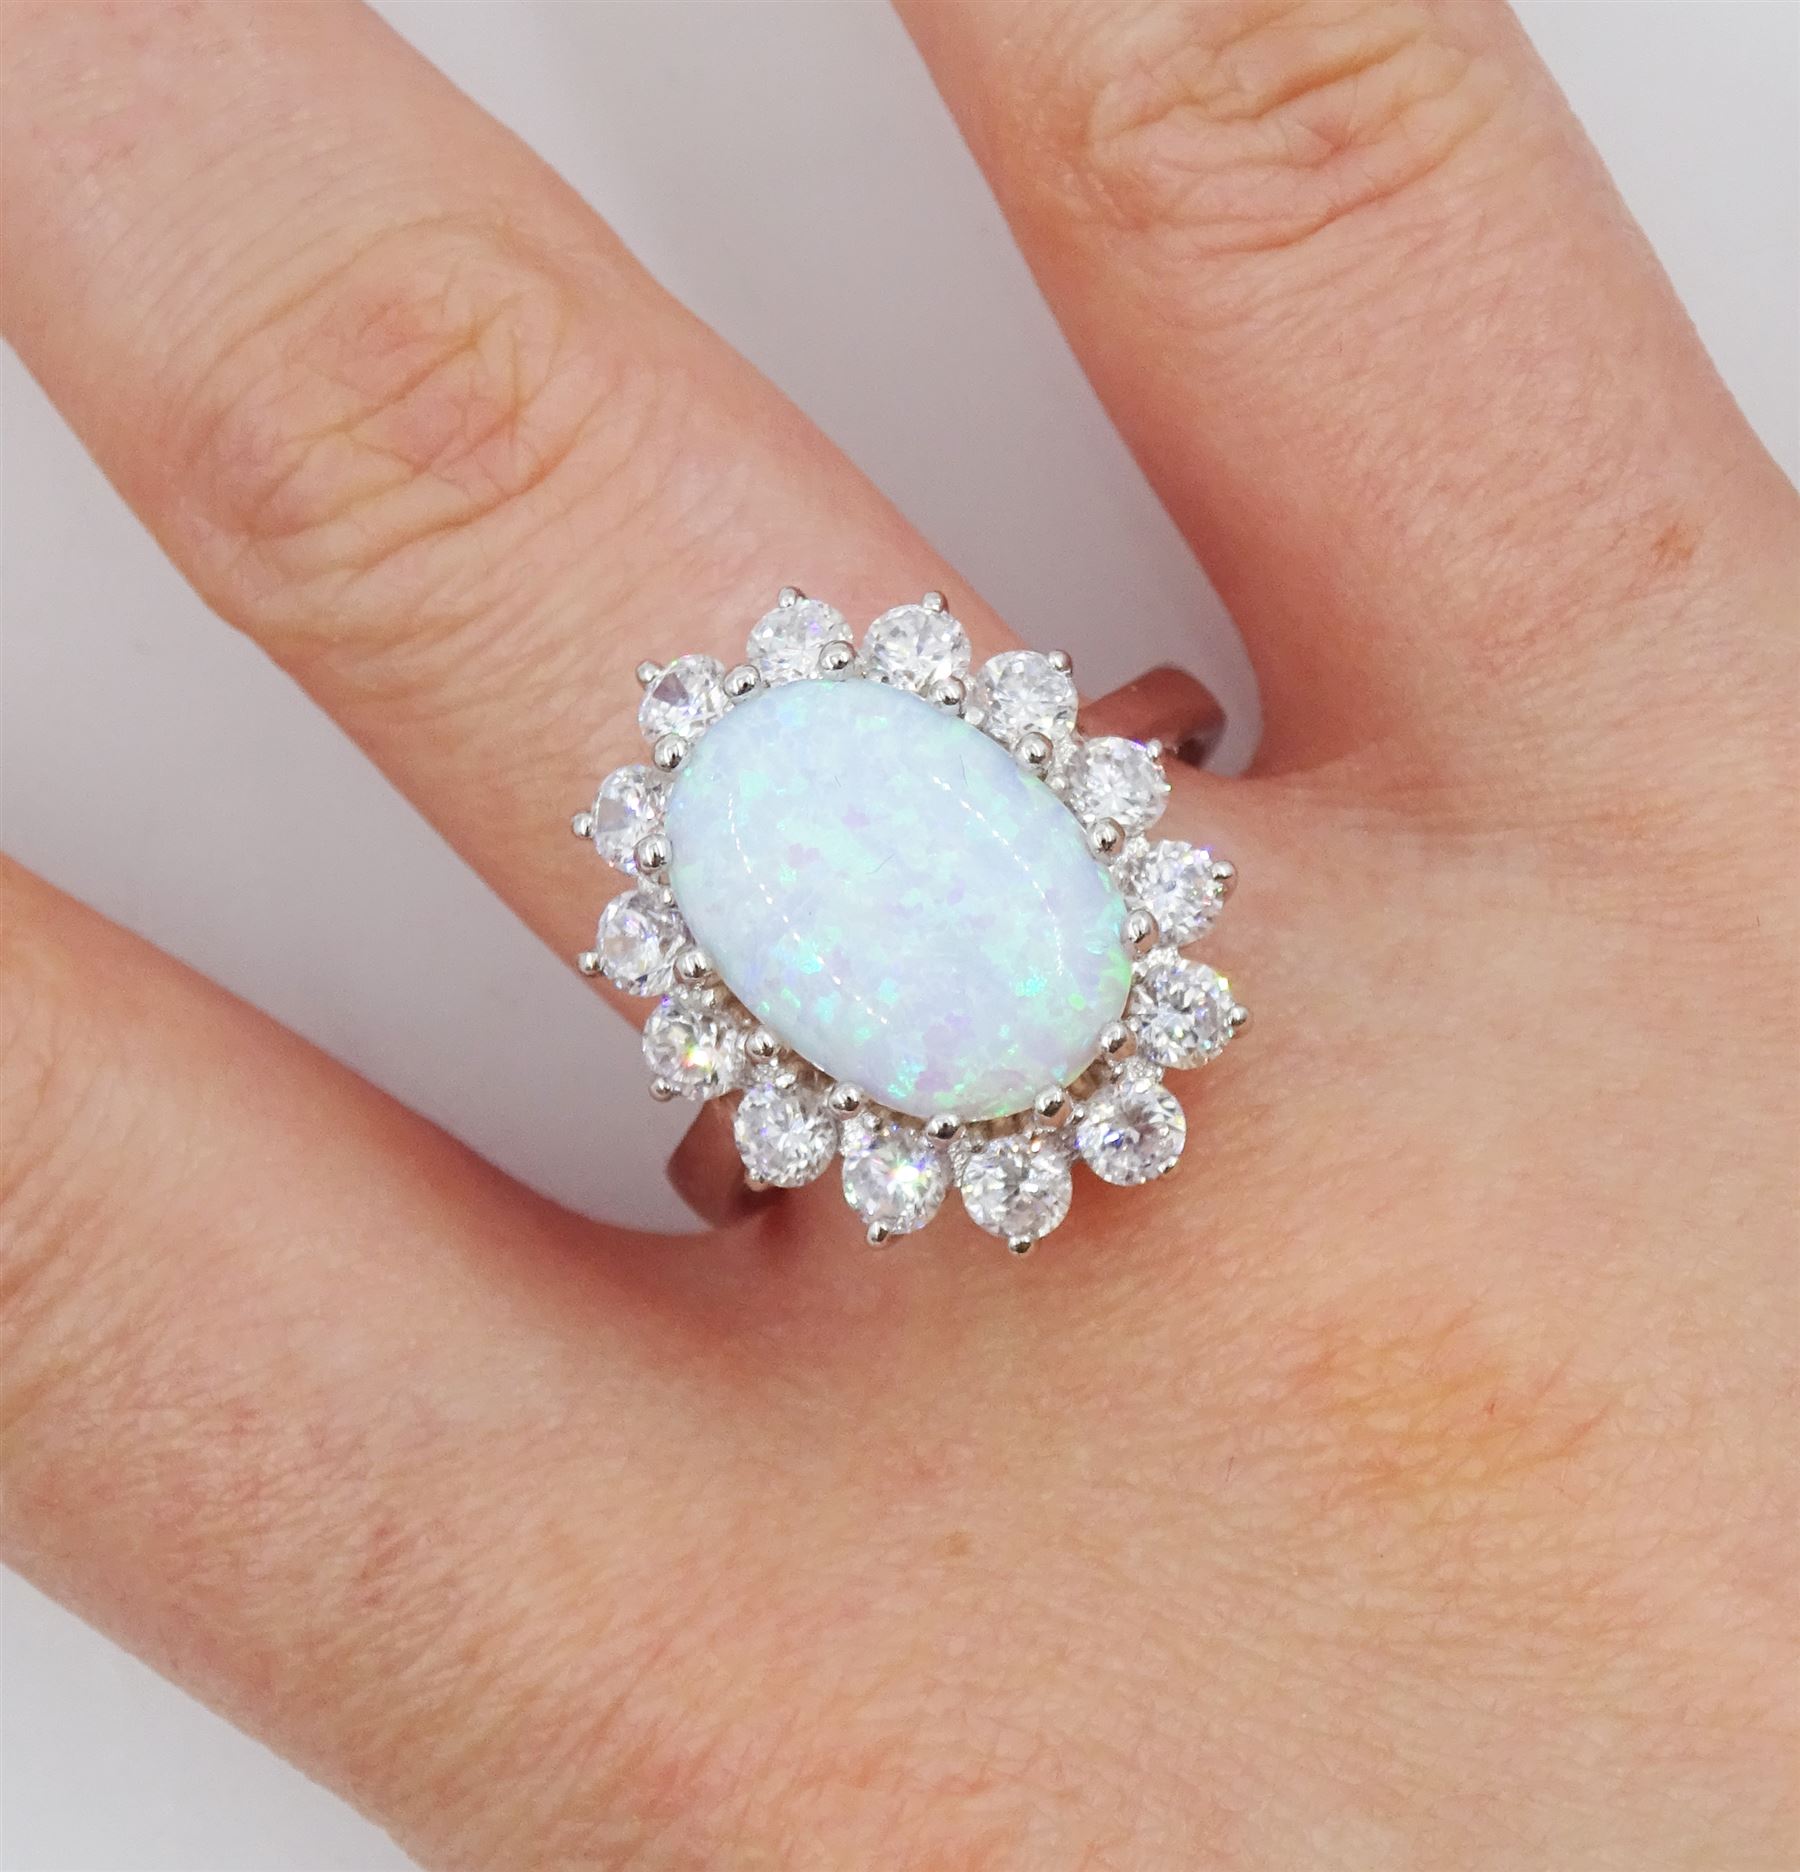 Silver opal and cubic zirconia cluster ring - Image 2 of 5